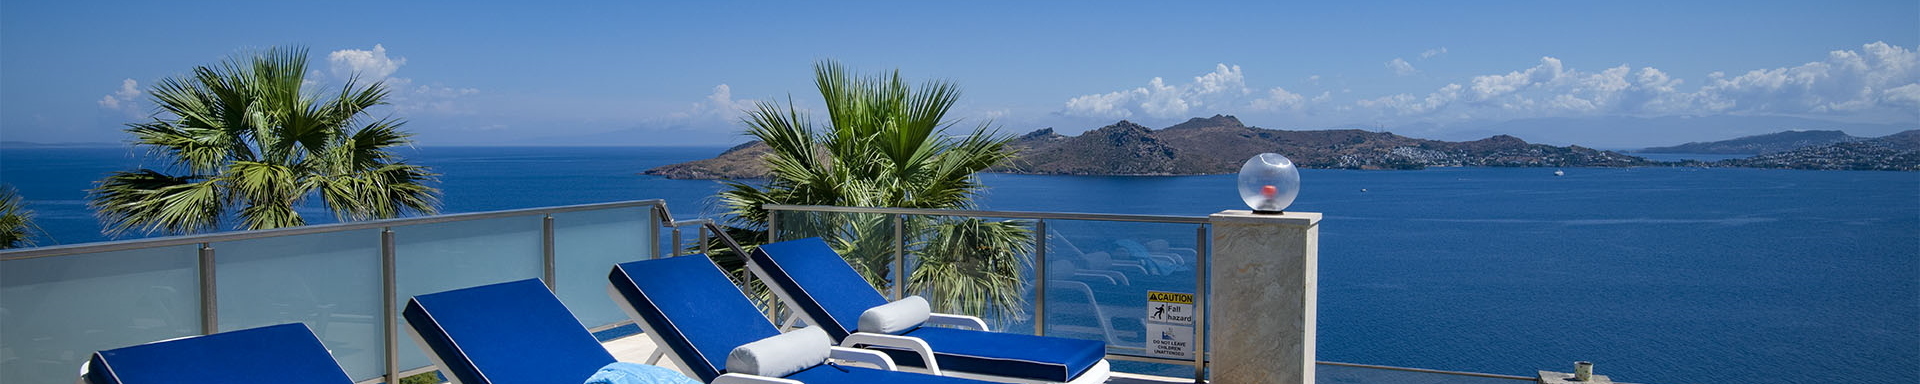 Aegean 220 Villa with Private Pool for Rent, Bodrum Turkey